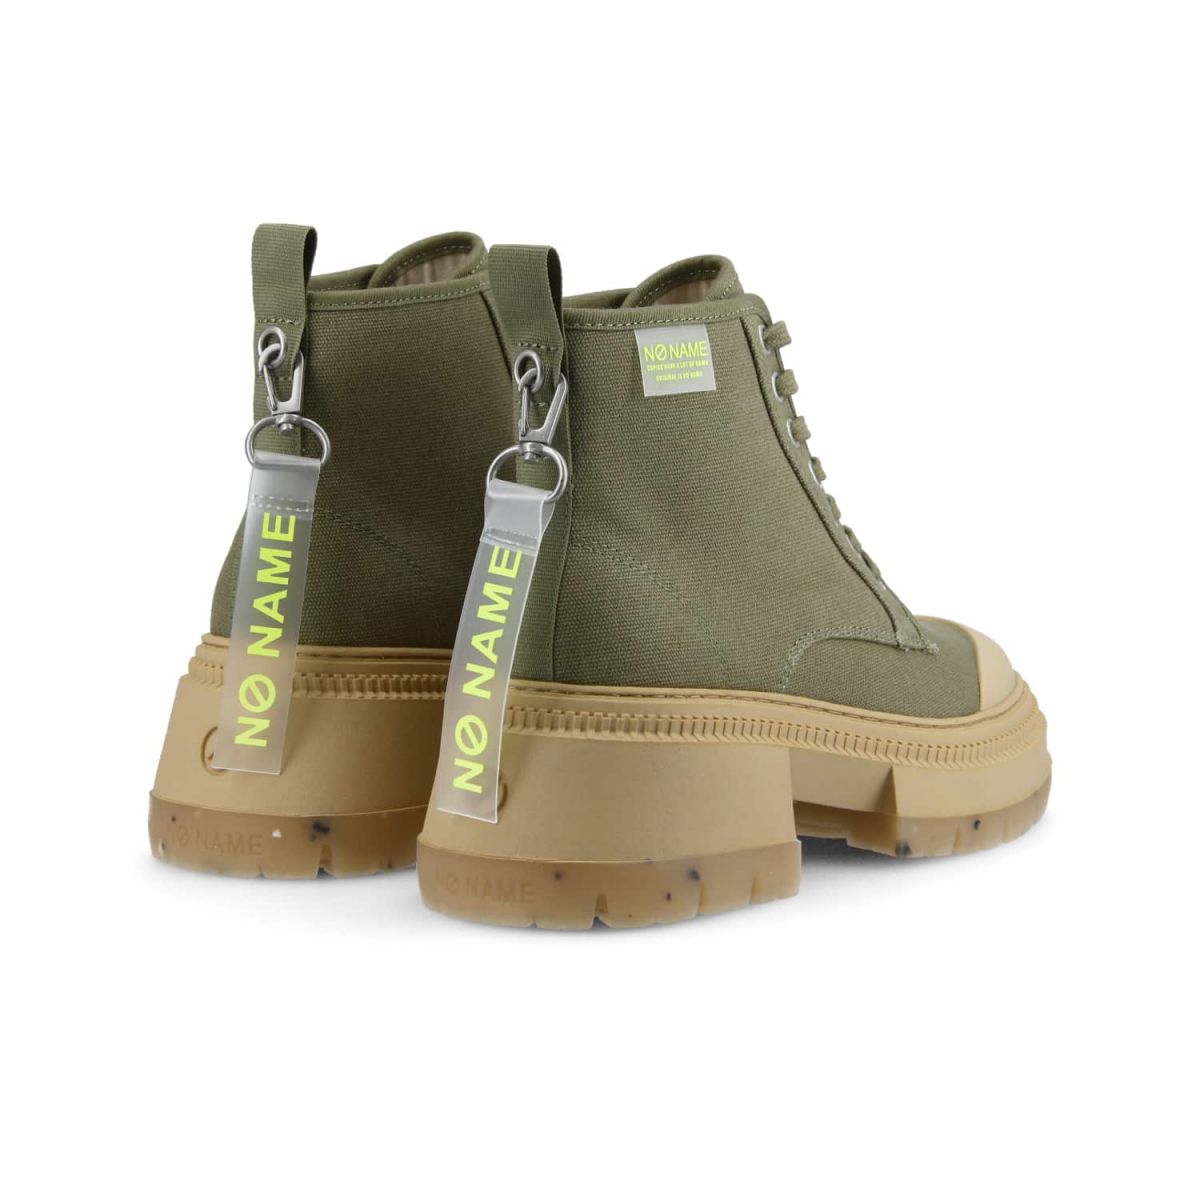 Strong Boots Canvas Recycled in Olive 01MNYGCY0466 - 4